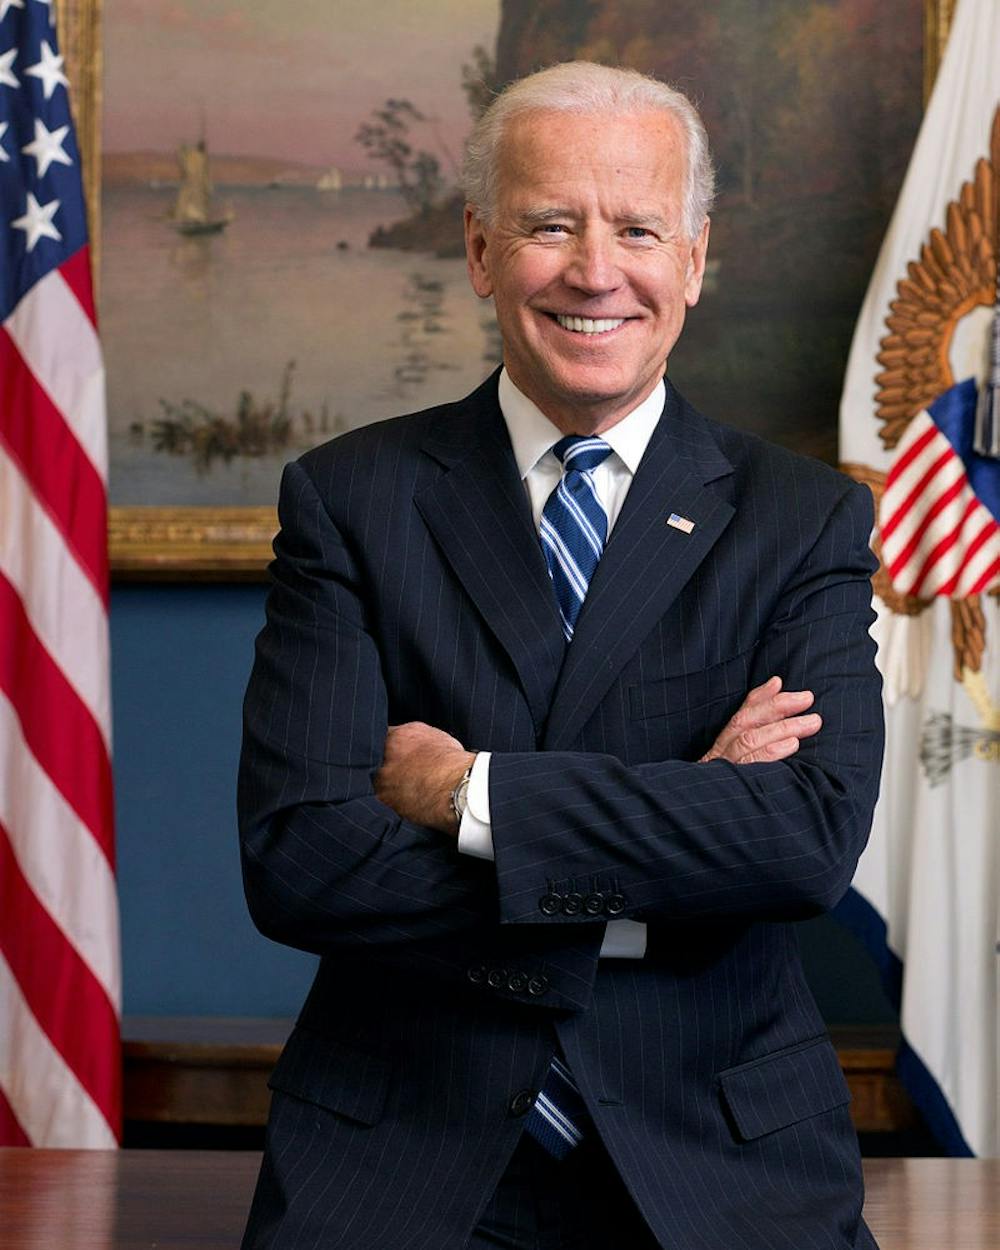 <p>Joe Biden is a figure of the past and he does not hold the vision nor the values that today’s party is looking for in a presidential candidate.&nbsp;</p>